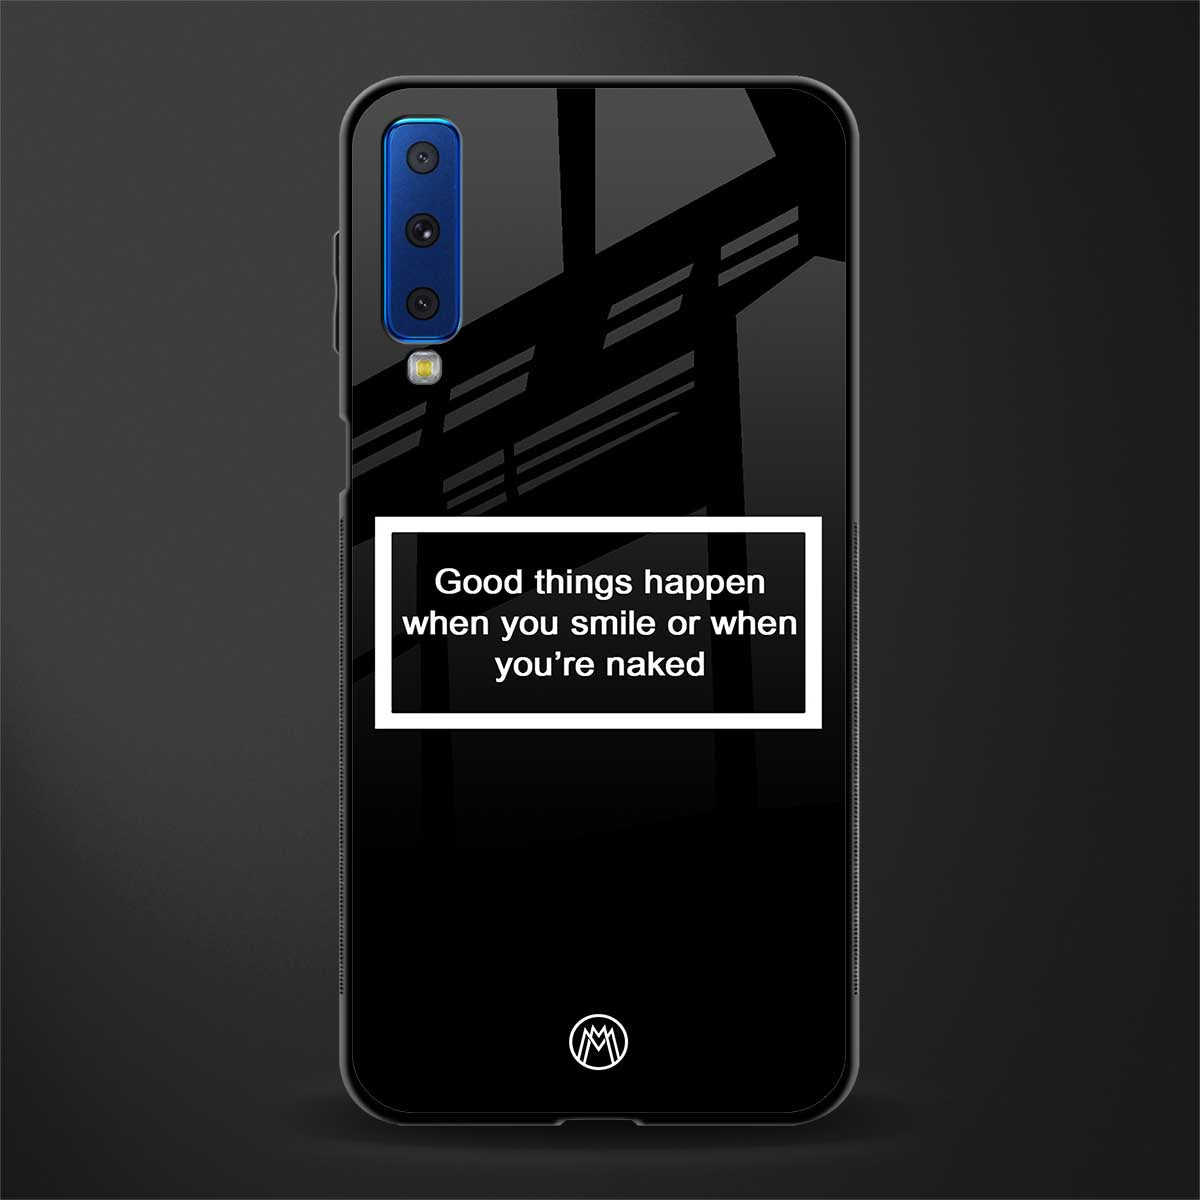 smile or naked black glass case for samsung galaxy a7 2018 image